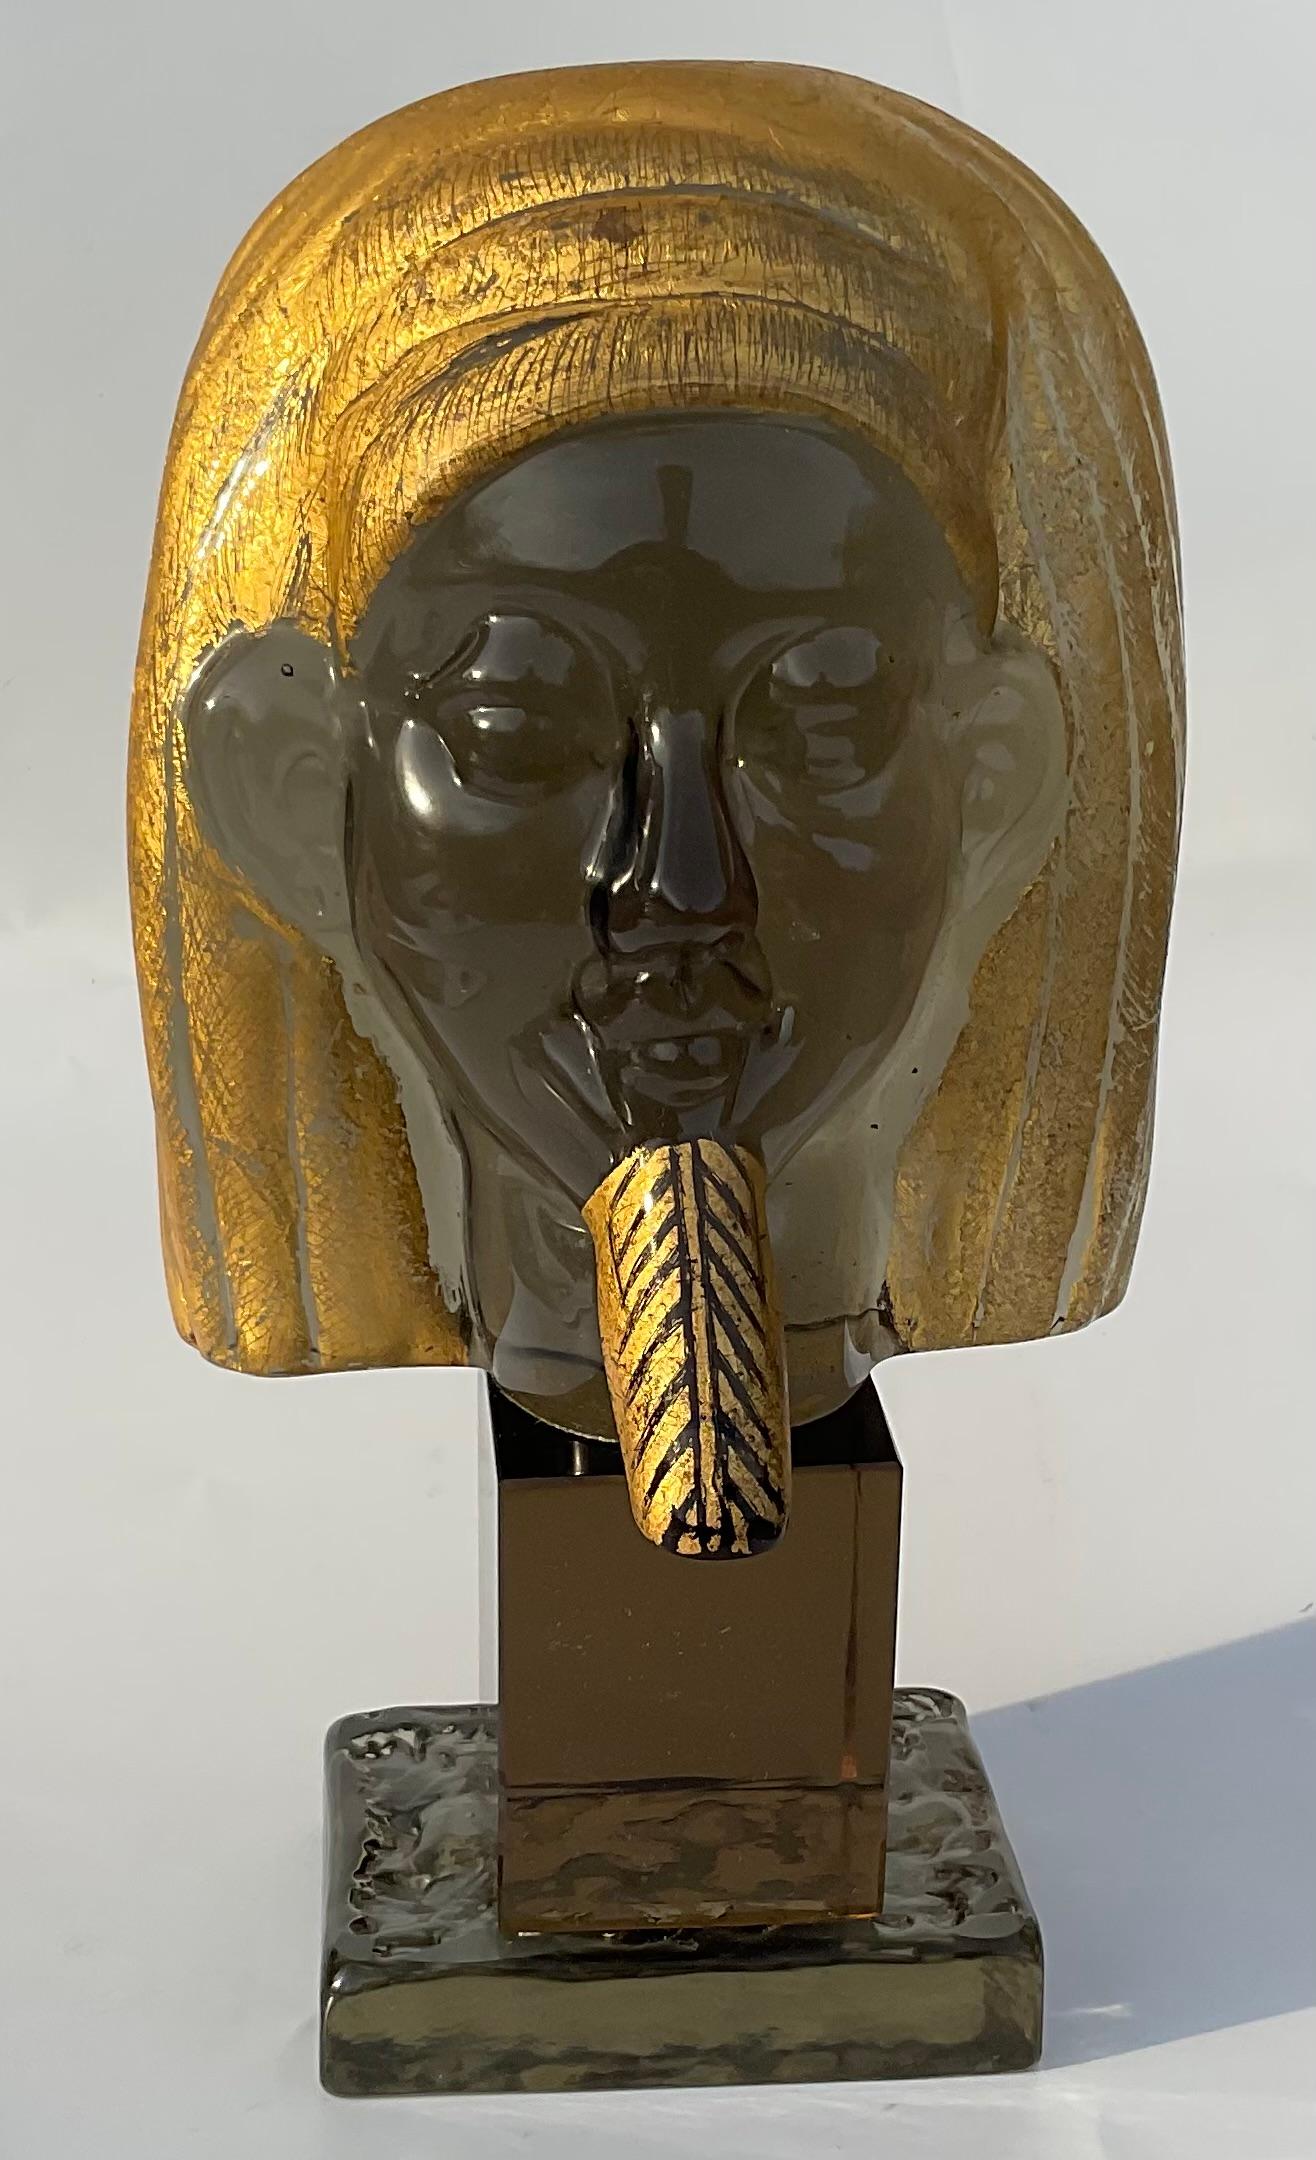 Italian Murano glass sculpture depicting a  bust of king tut by Ermanno Nason. Signed on bottom. Dated 1975. Ermanno Nason (1928-2013) worked with all the greatest contemporary artists, from Marc Chagall to Oscar Kokoschka, from Pablo Picasso to